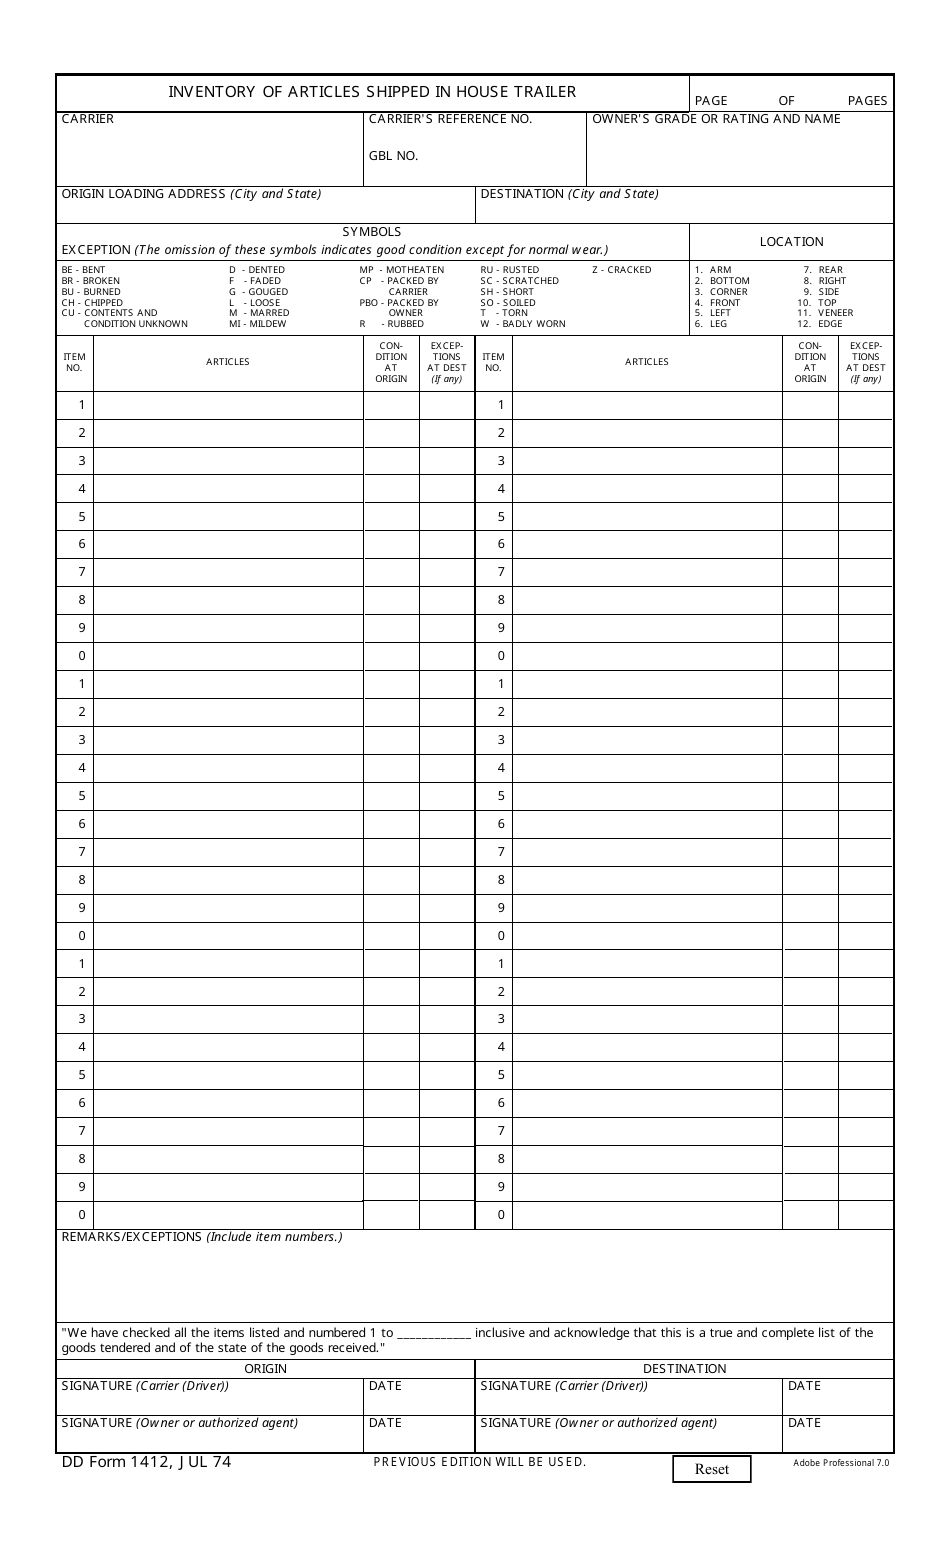 DD Form 1412 Inventory of Articles Shipped in House Trailer, Page 1